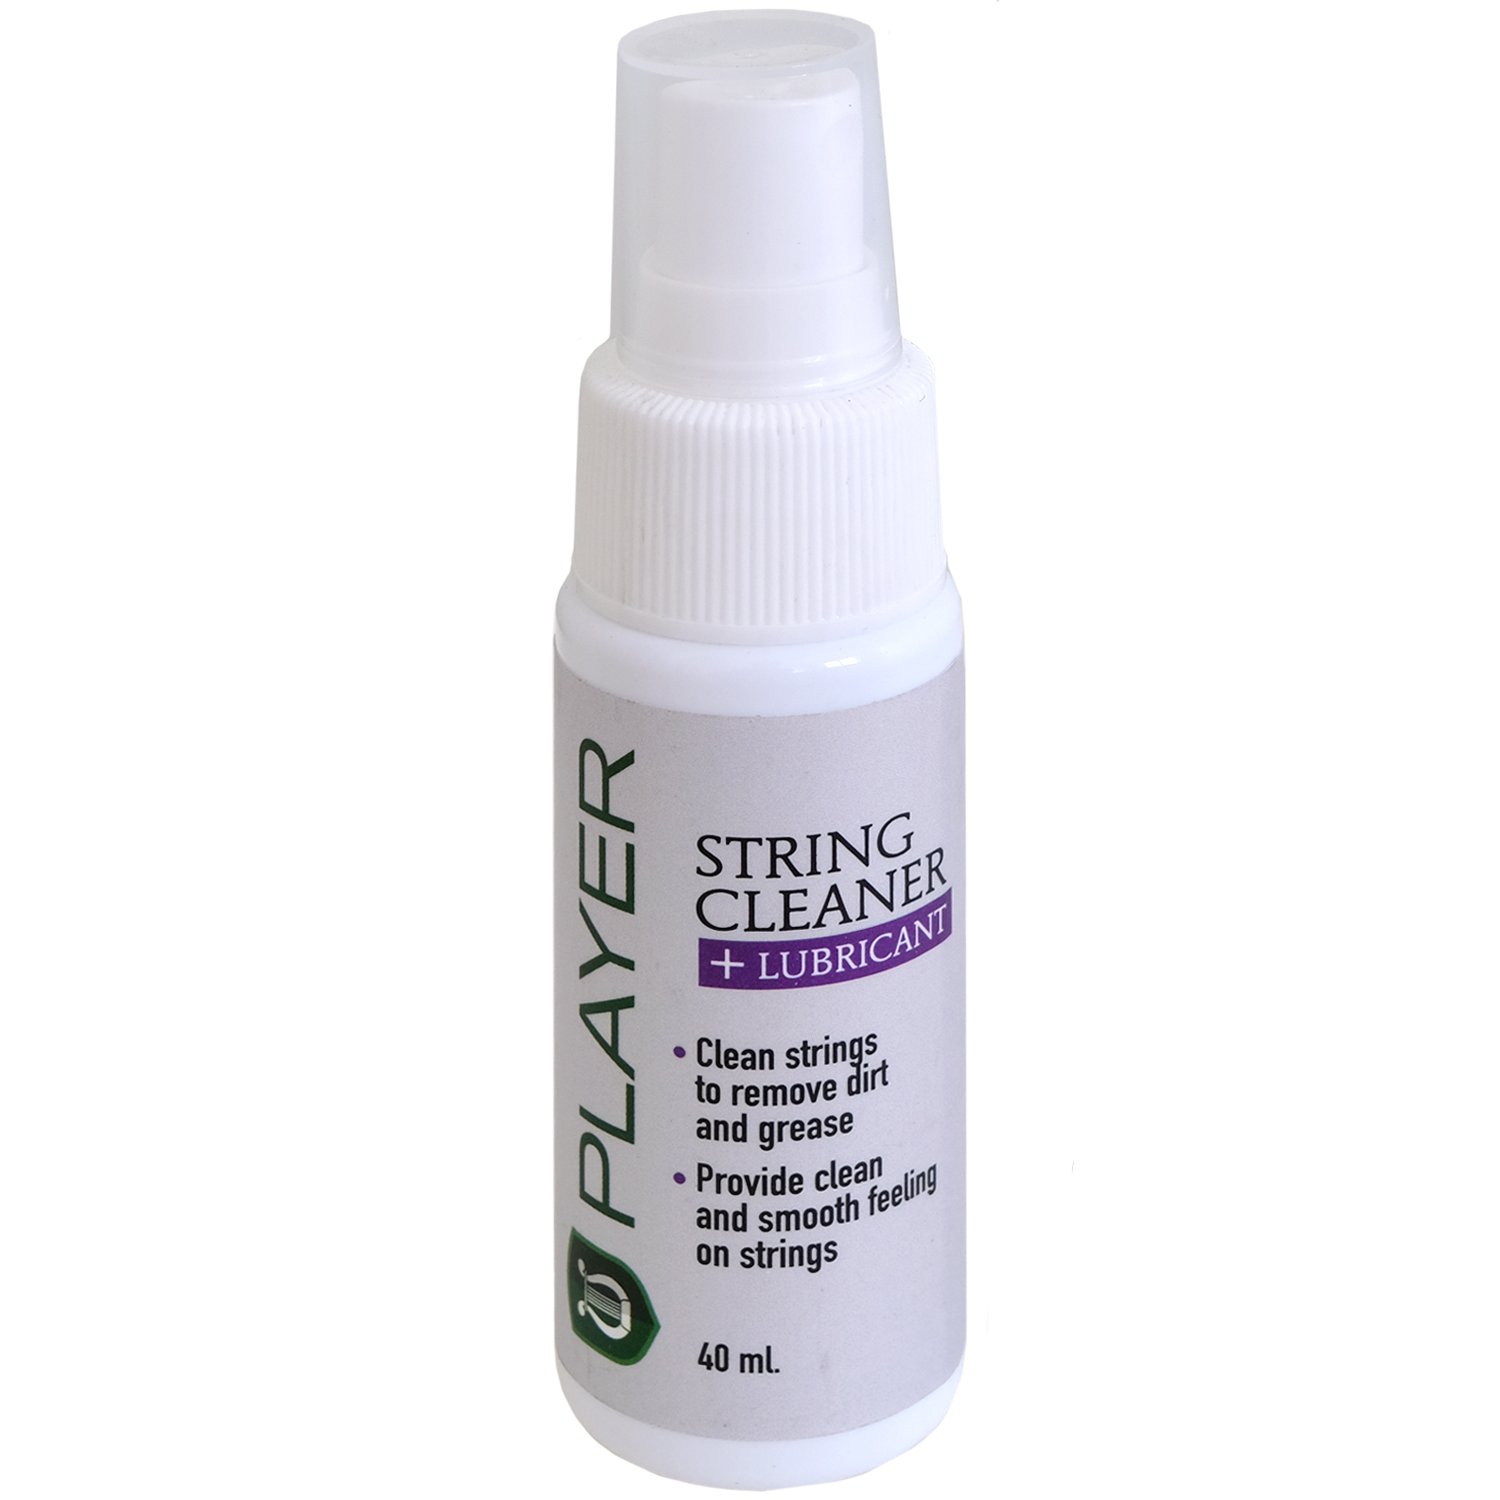 Player string cleaner